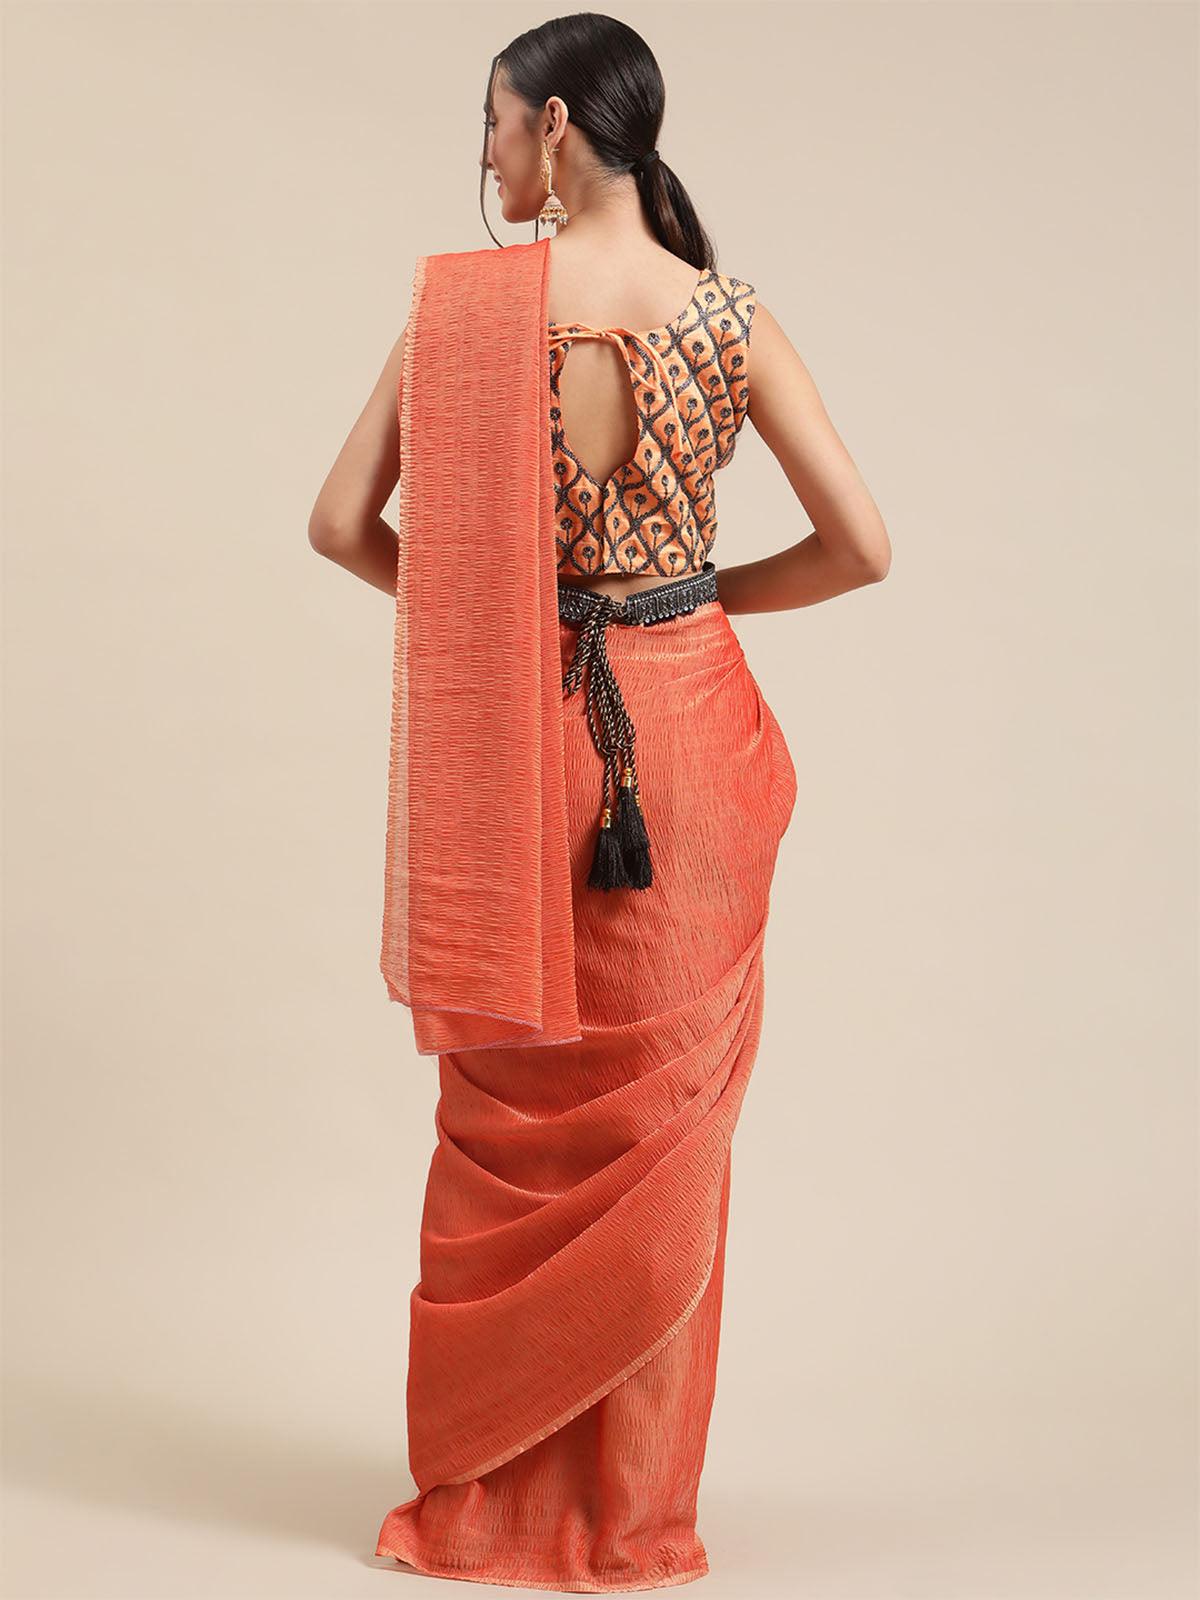 Women's Polycotton Orange Solid Belted Sarees With Blouse Piece - Odette